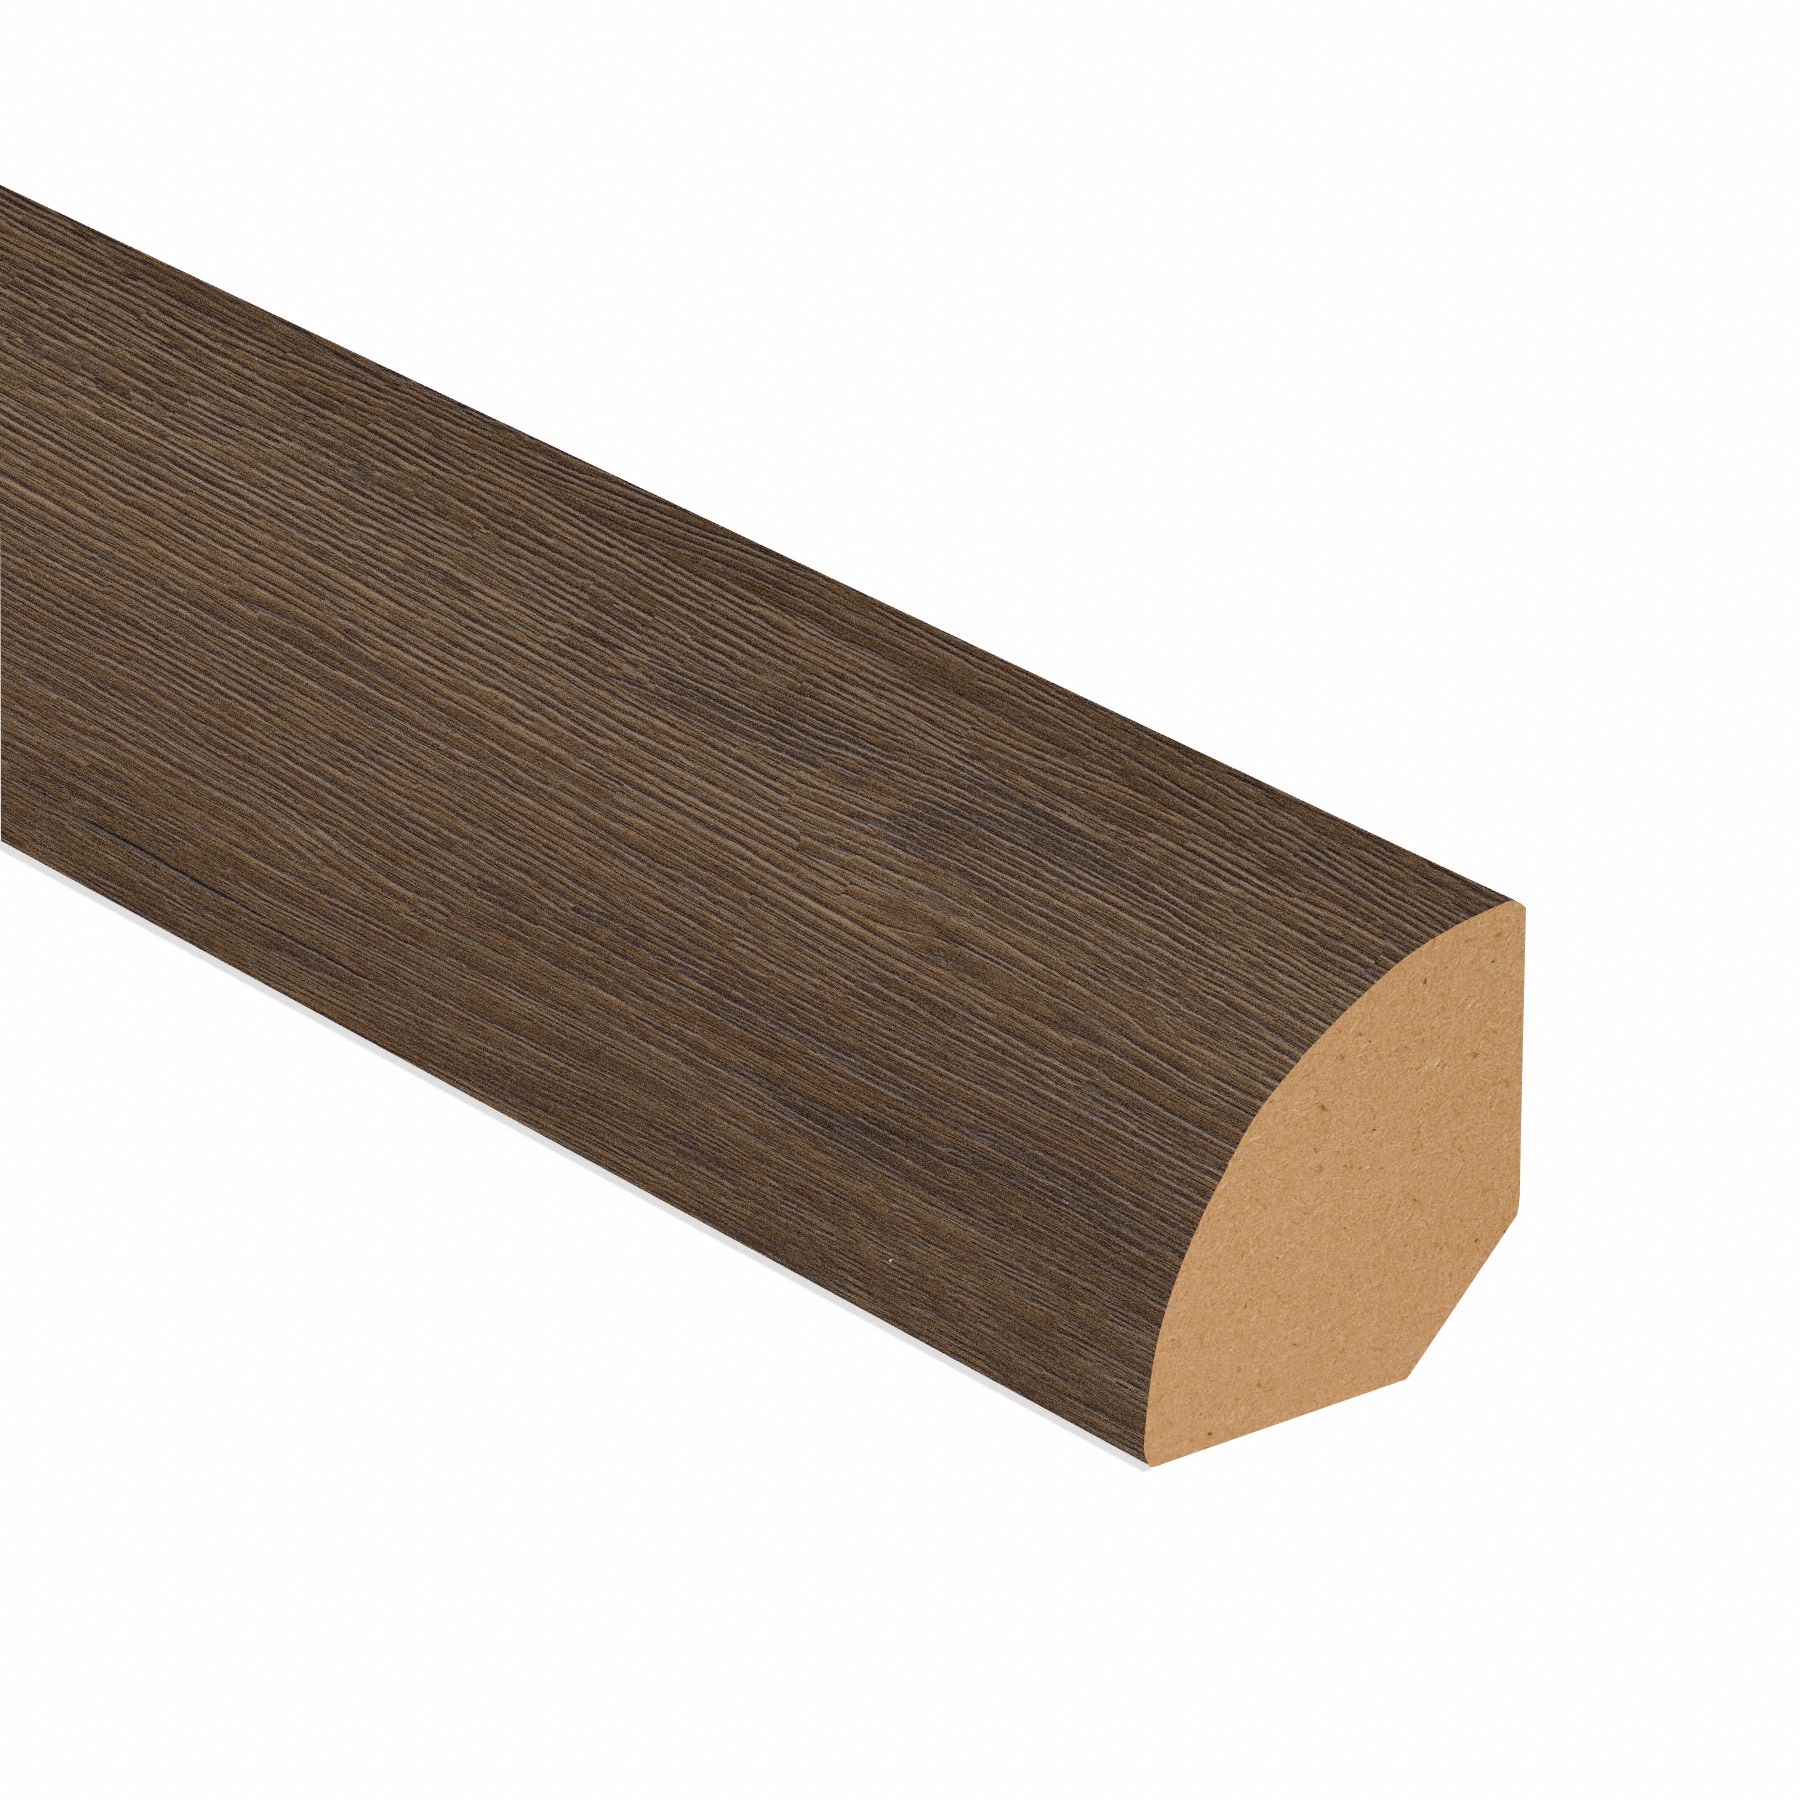 Tacoma Oak 0.75 in wide x 7.5 ft length Quarter Round